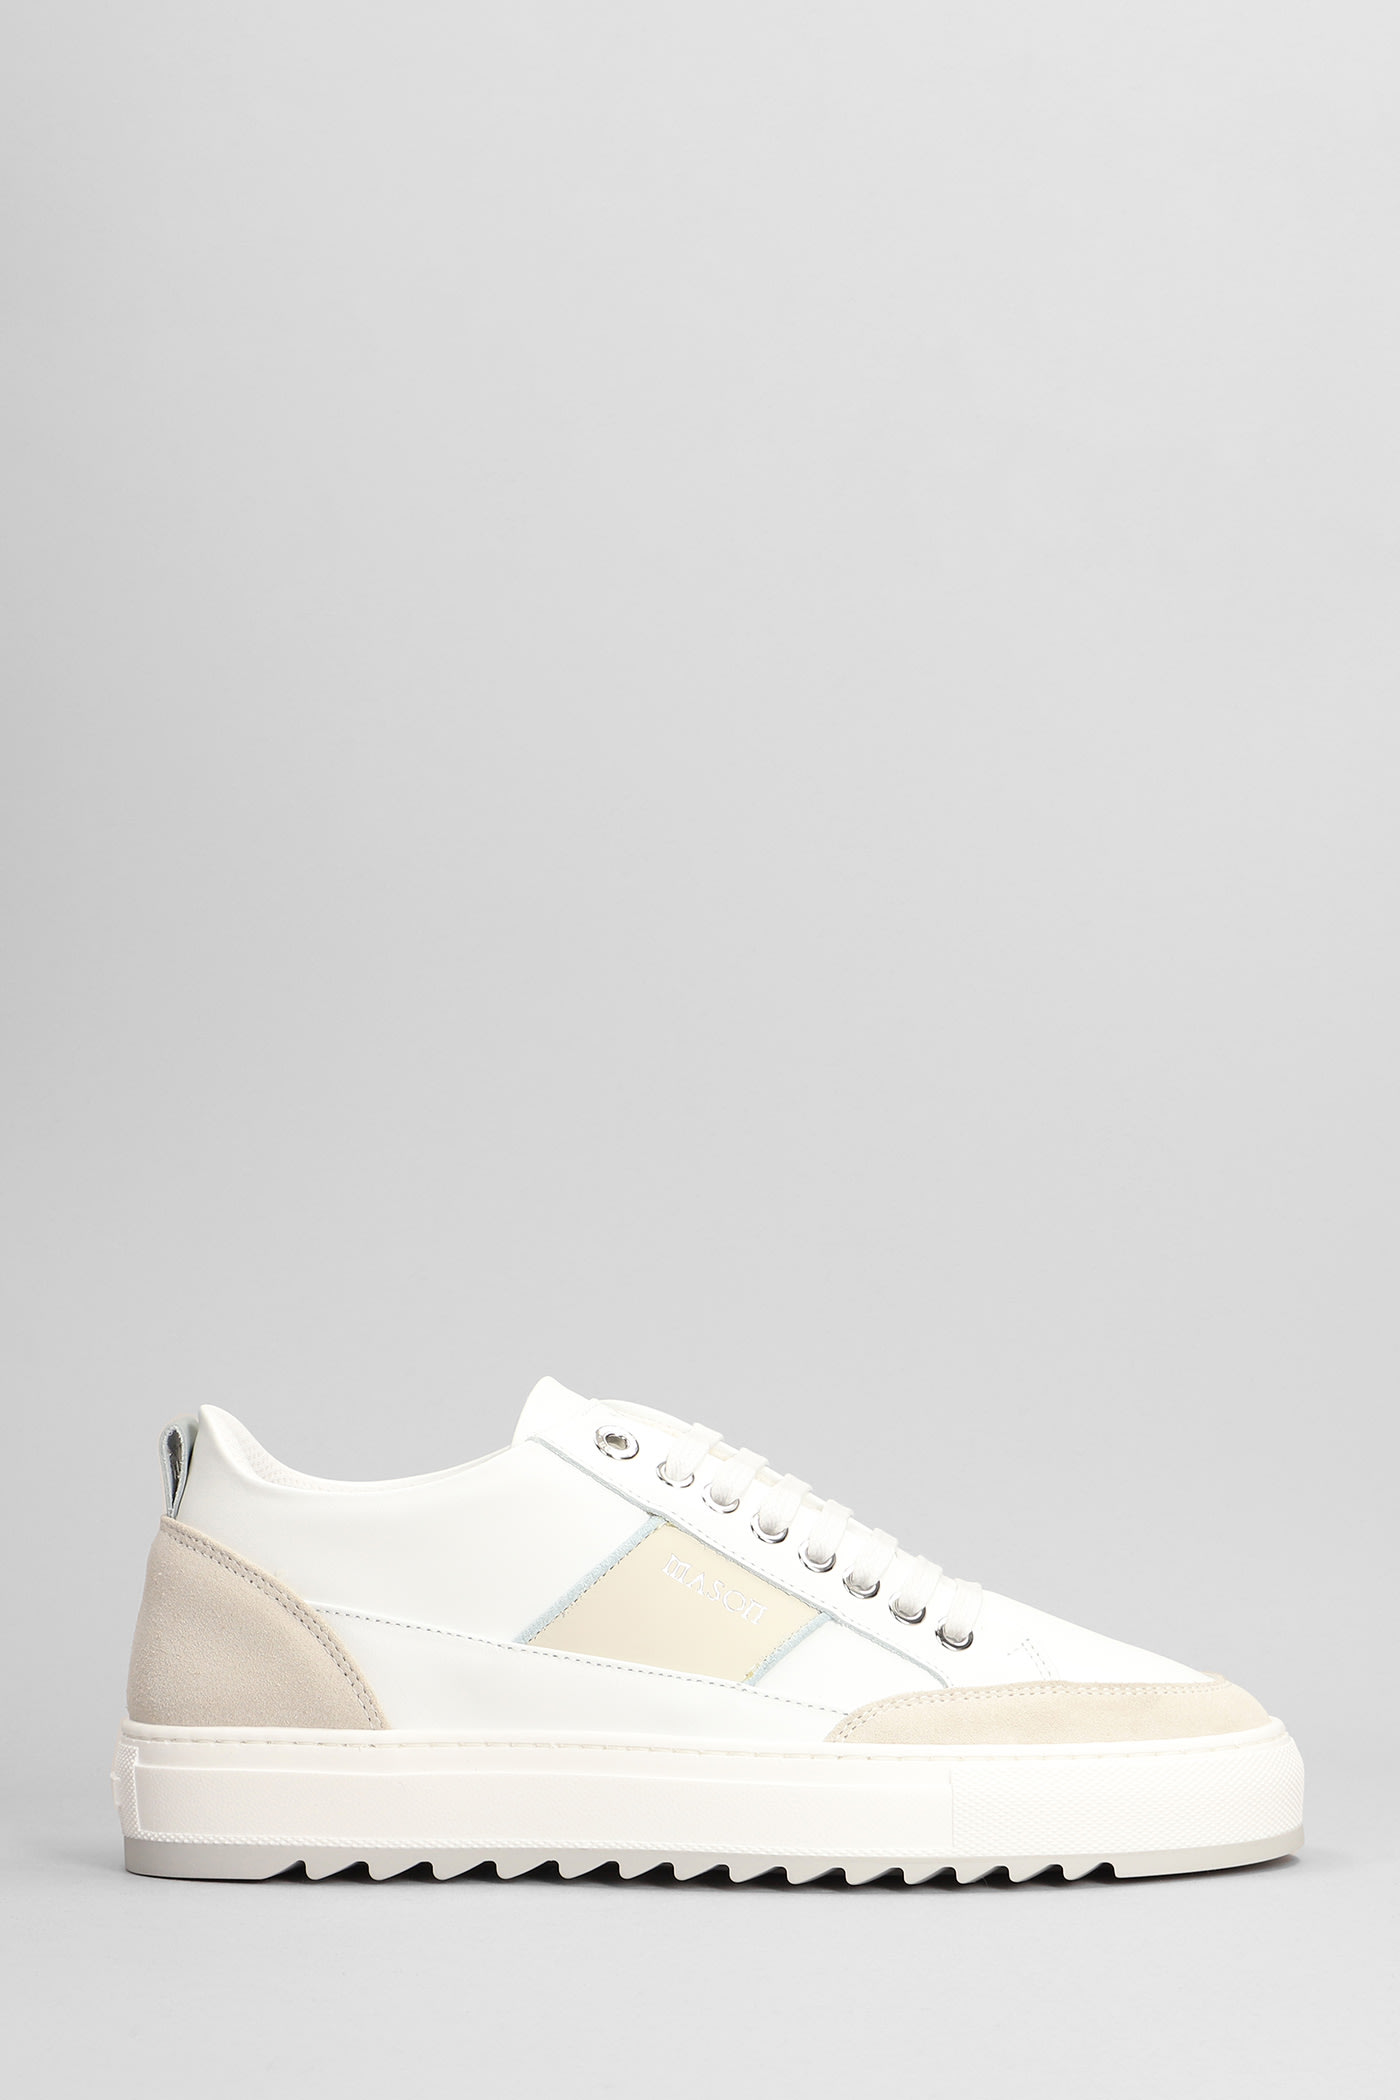 Mason Garments Tia Sneakers In White Suede And Leather